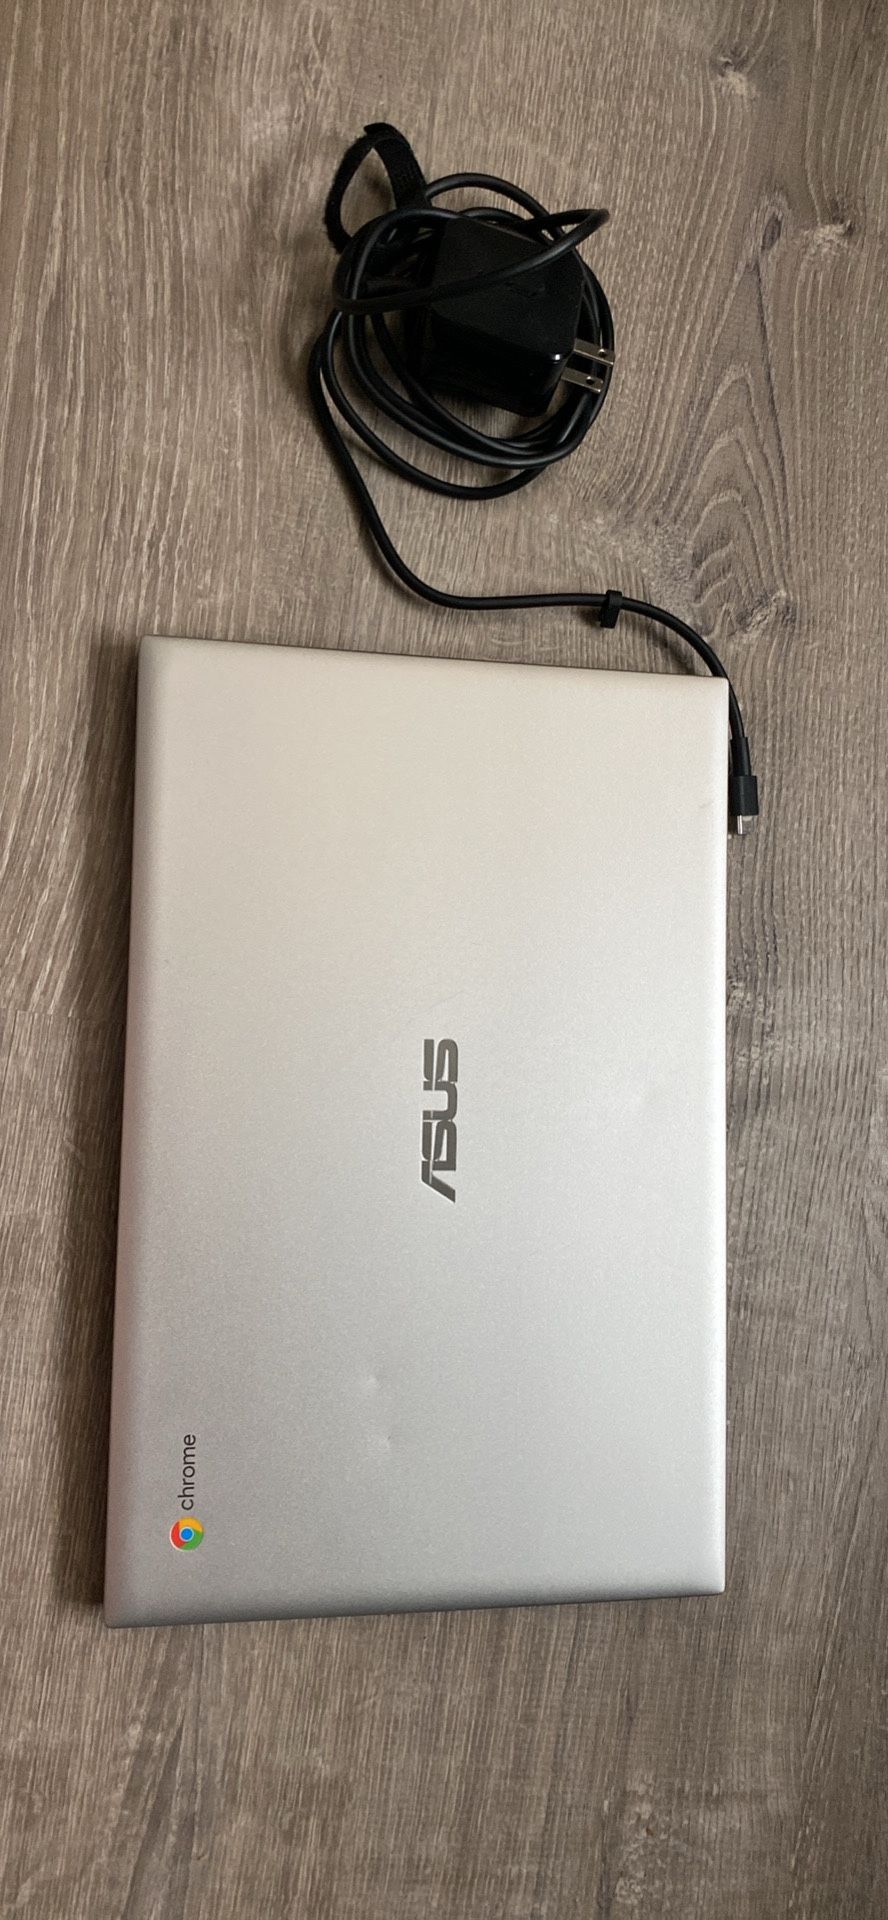 Asus Notebook Pc